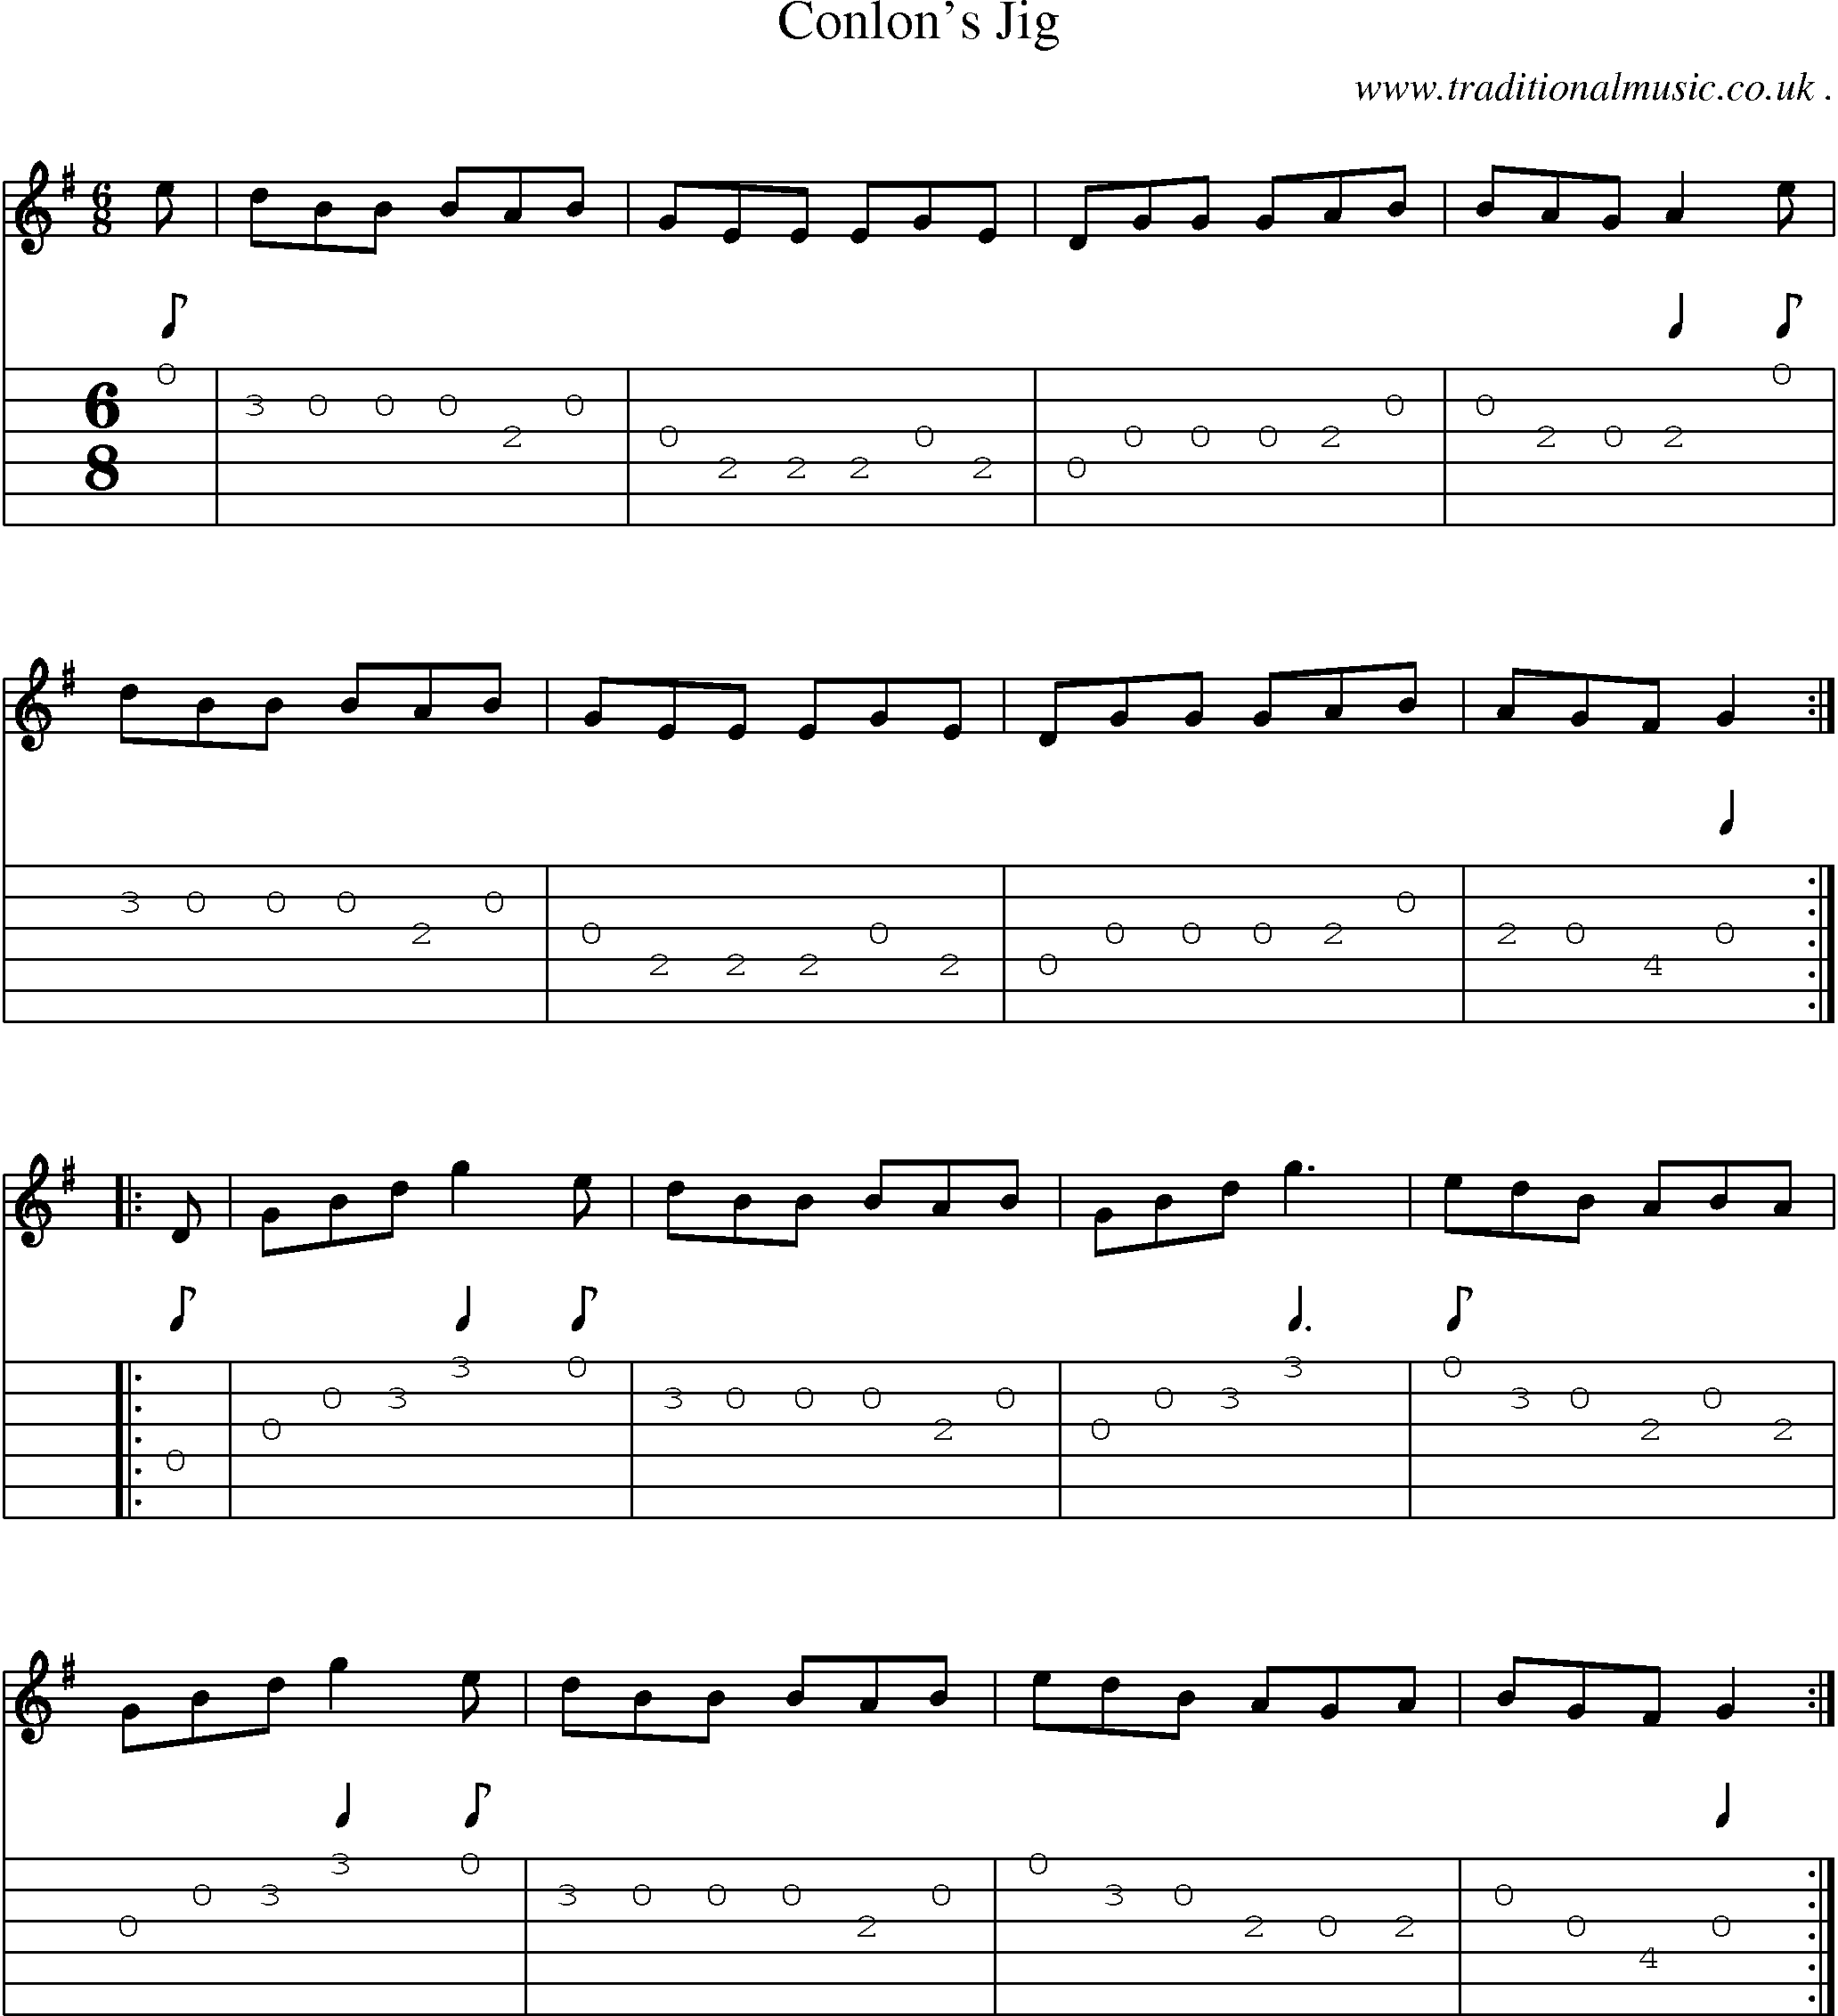 Sheet-Music and Guitar Tabs for Conlons Jig